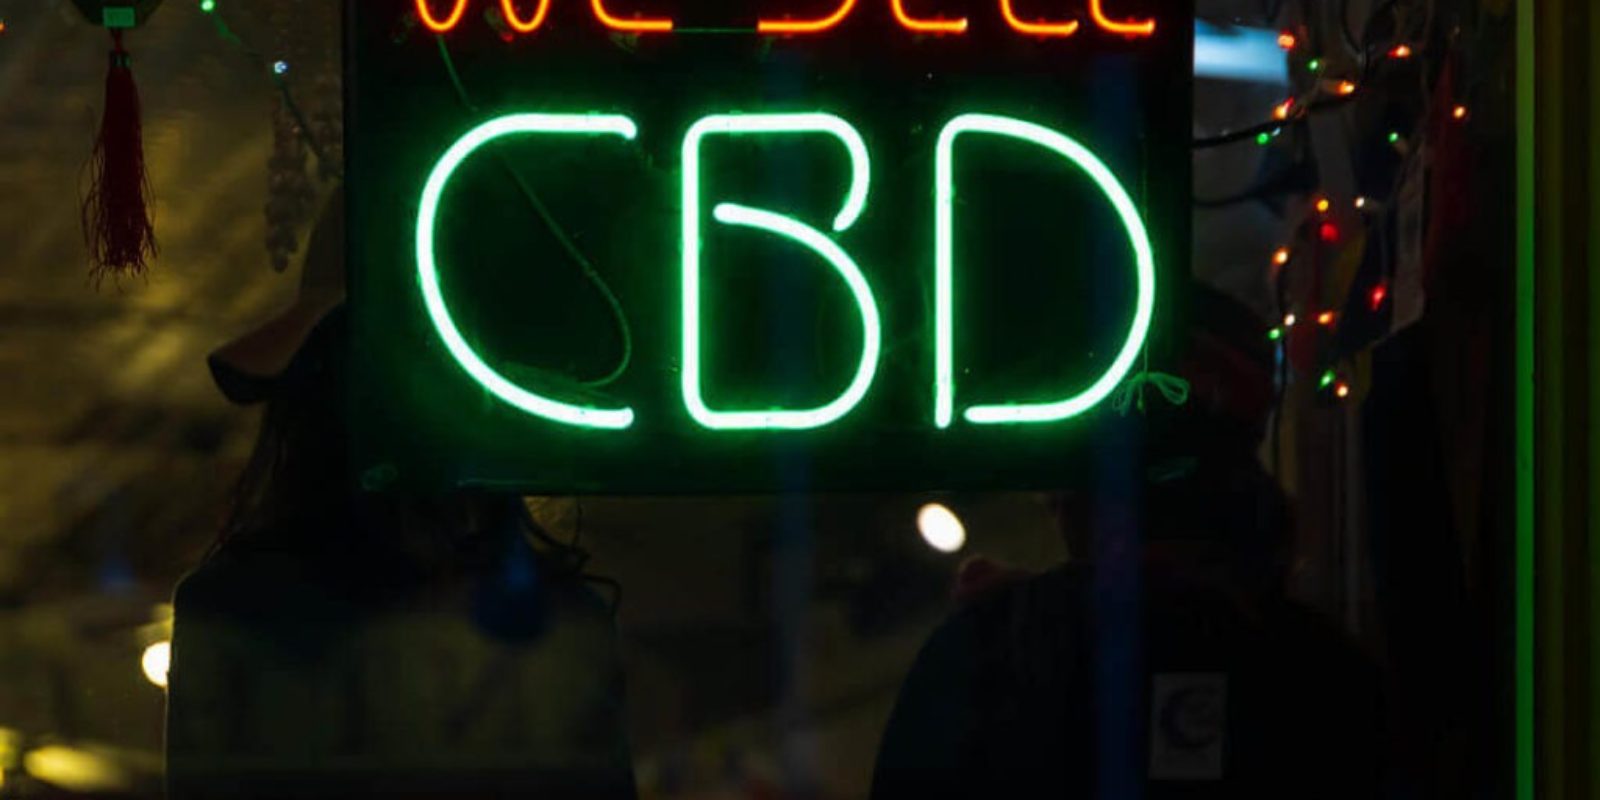 "We sell CBD" neon sign in the window of a CBD Franchise